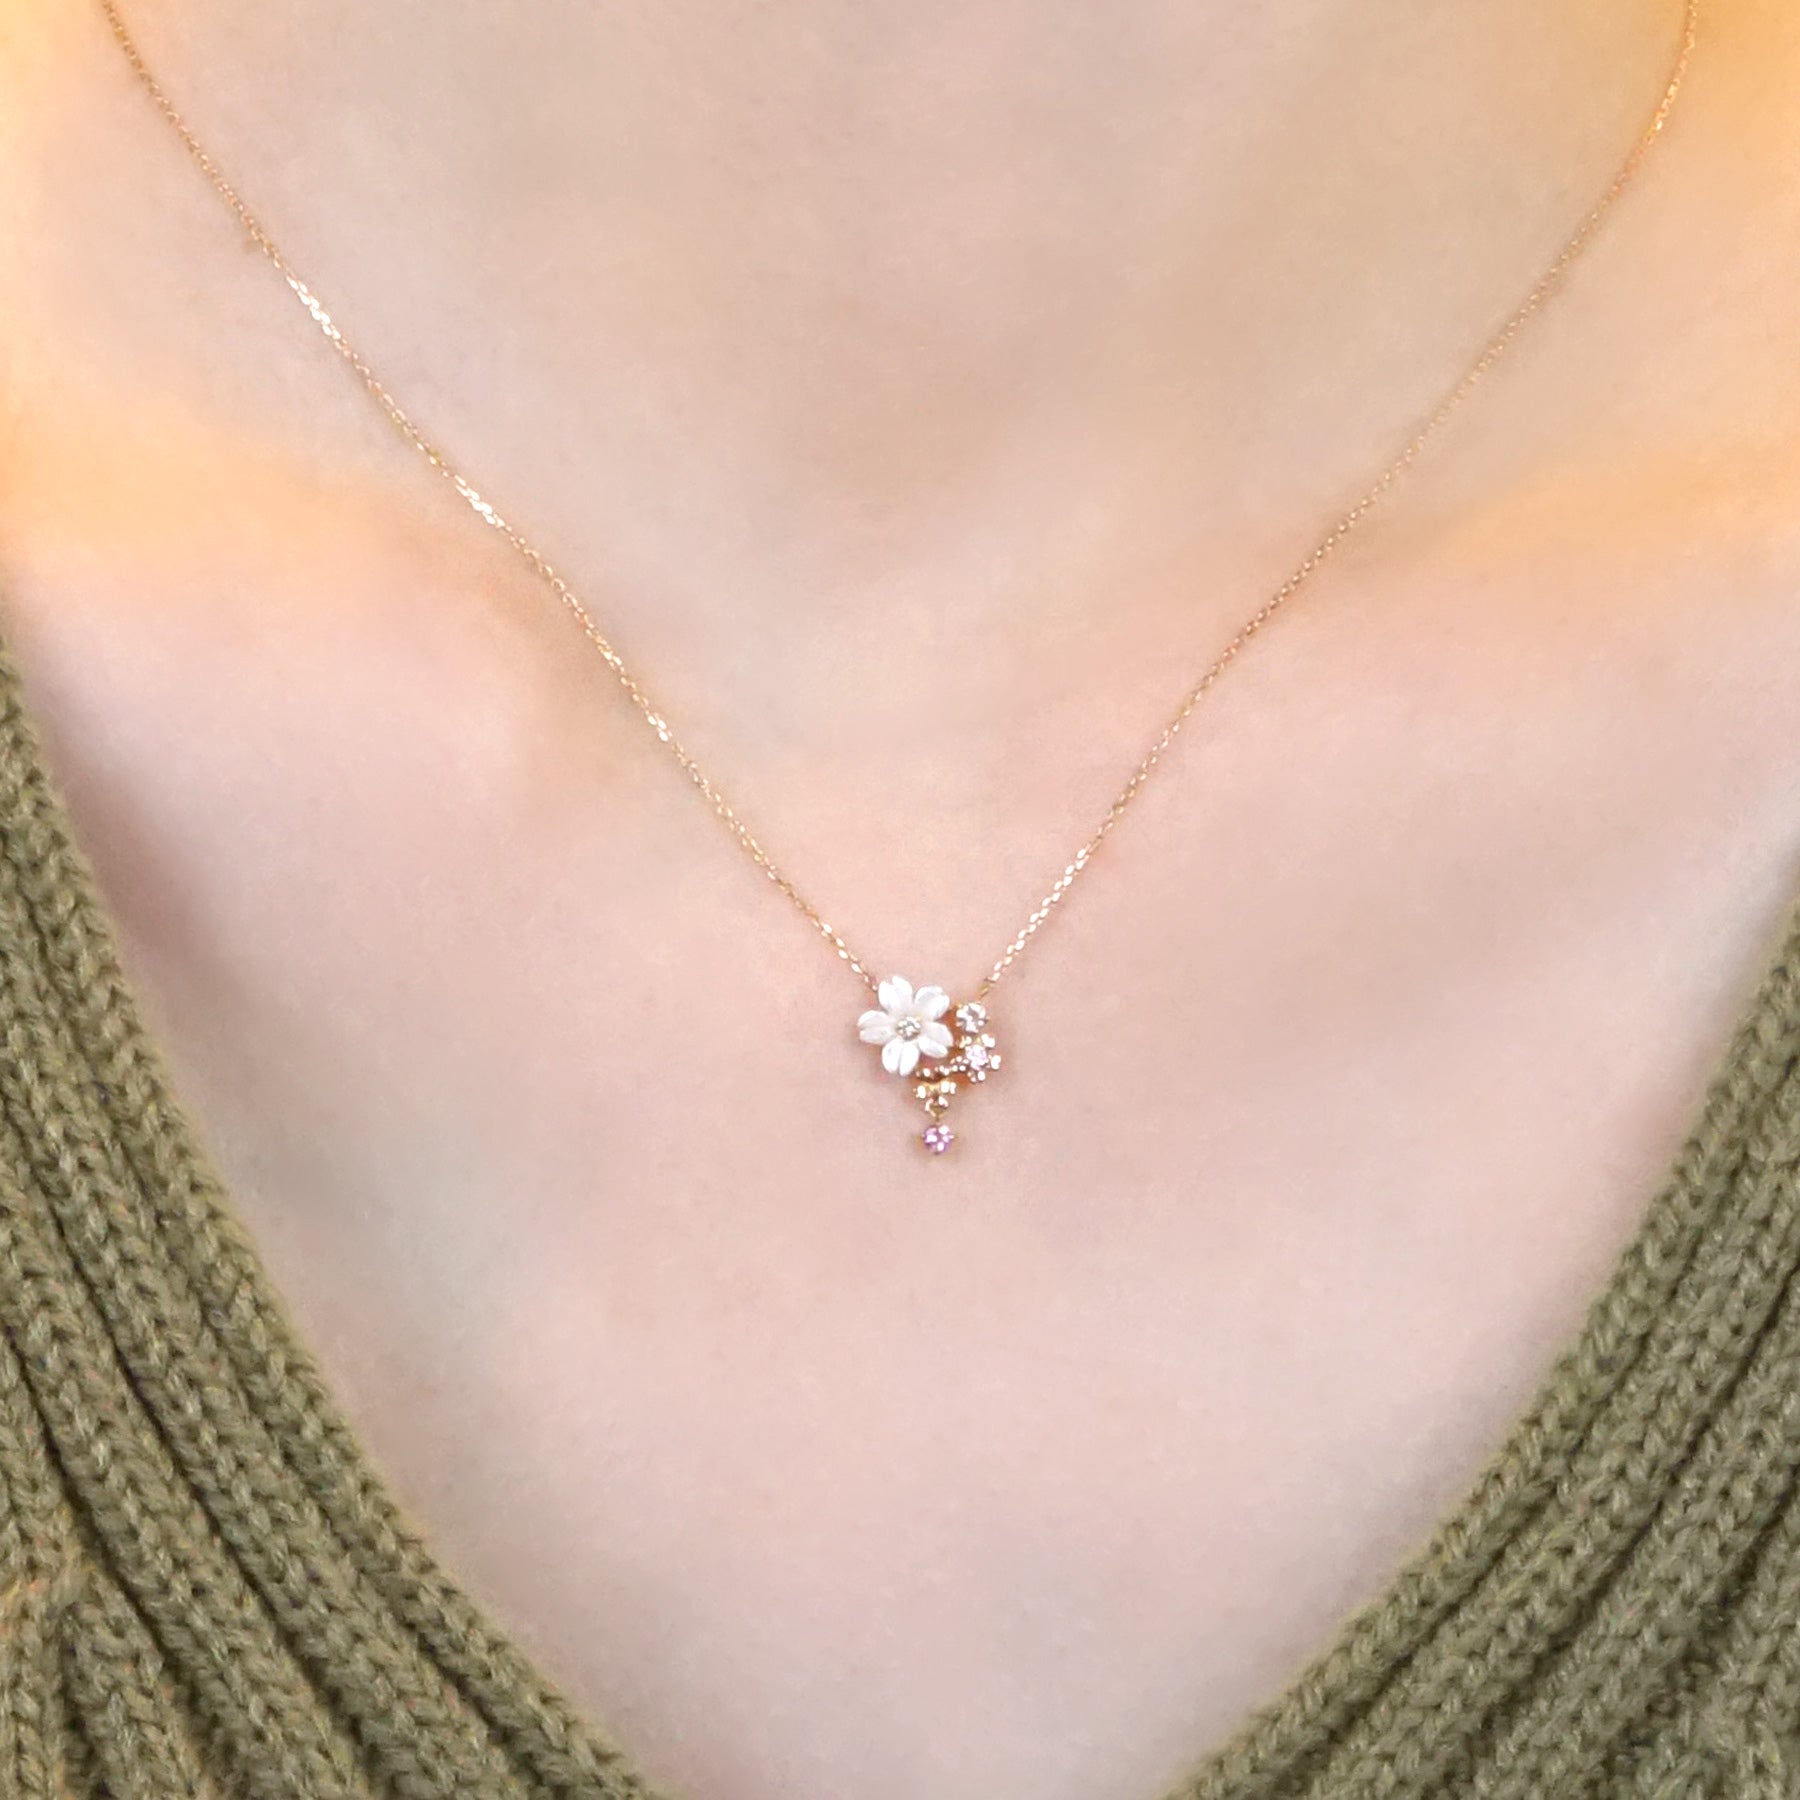 [Birth Flower Jewelry] April Cherry Blossoms Necklace - Model Image